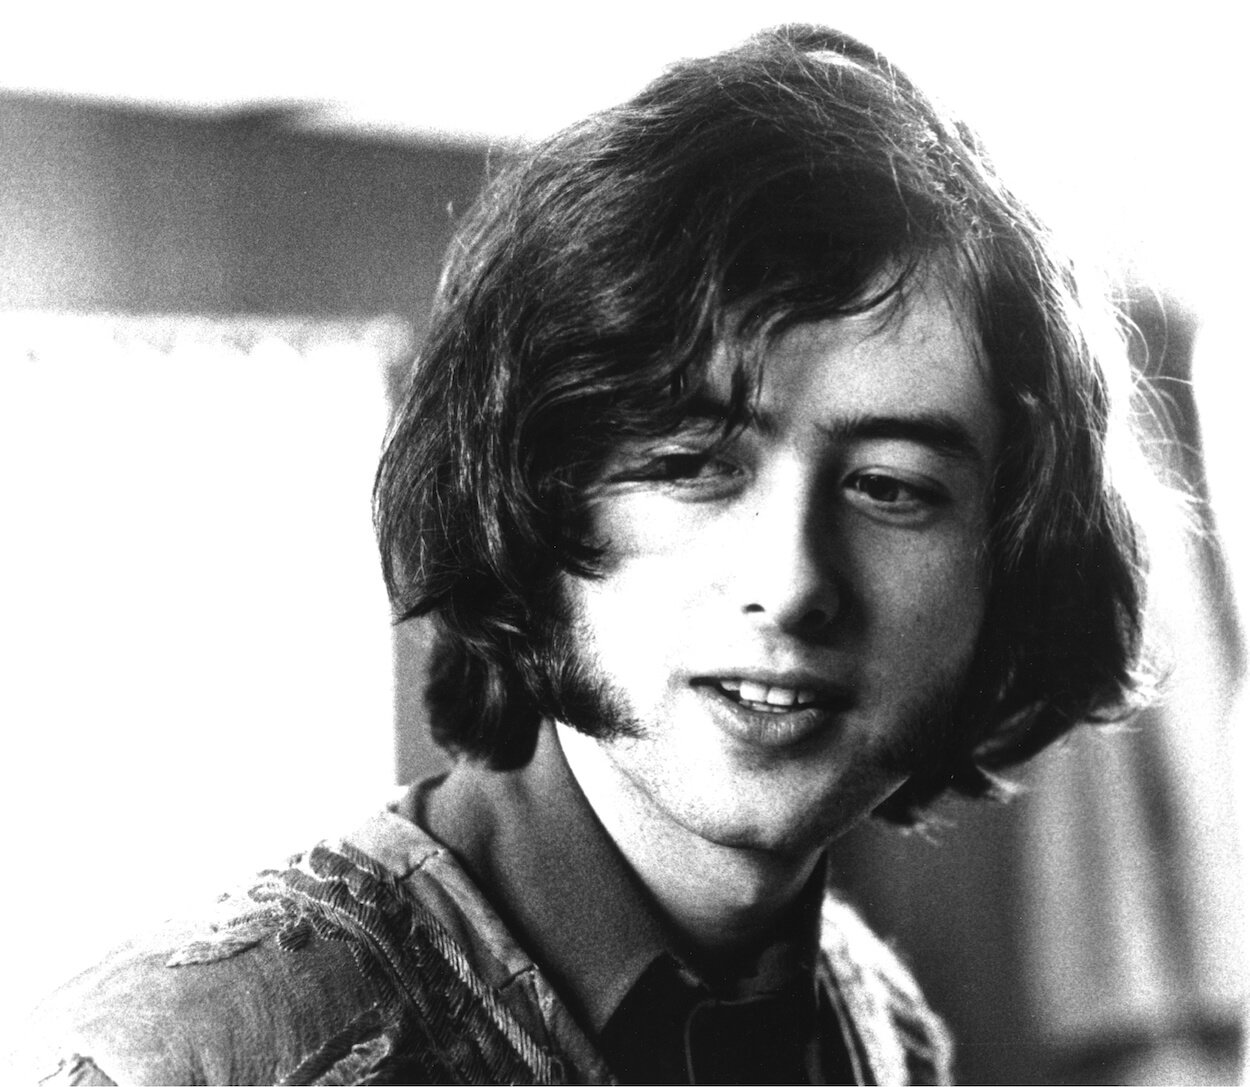 Jimmy Page looking off-camera before a Yardbirds concert in 1966.